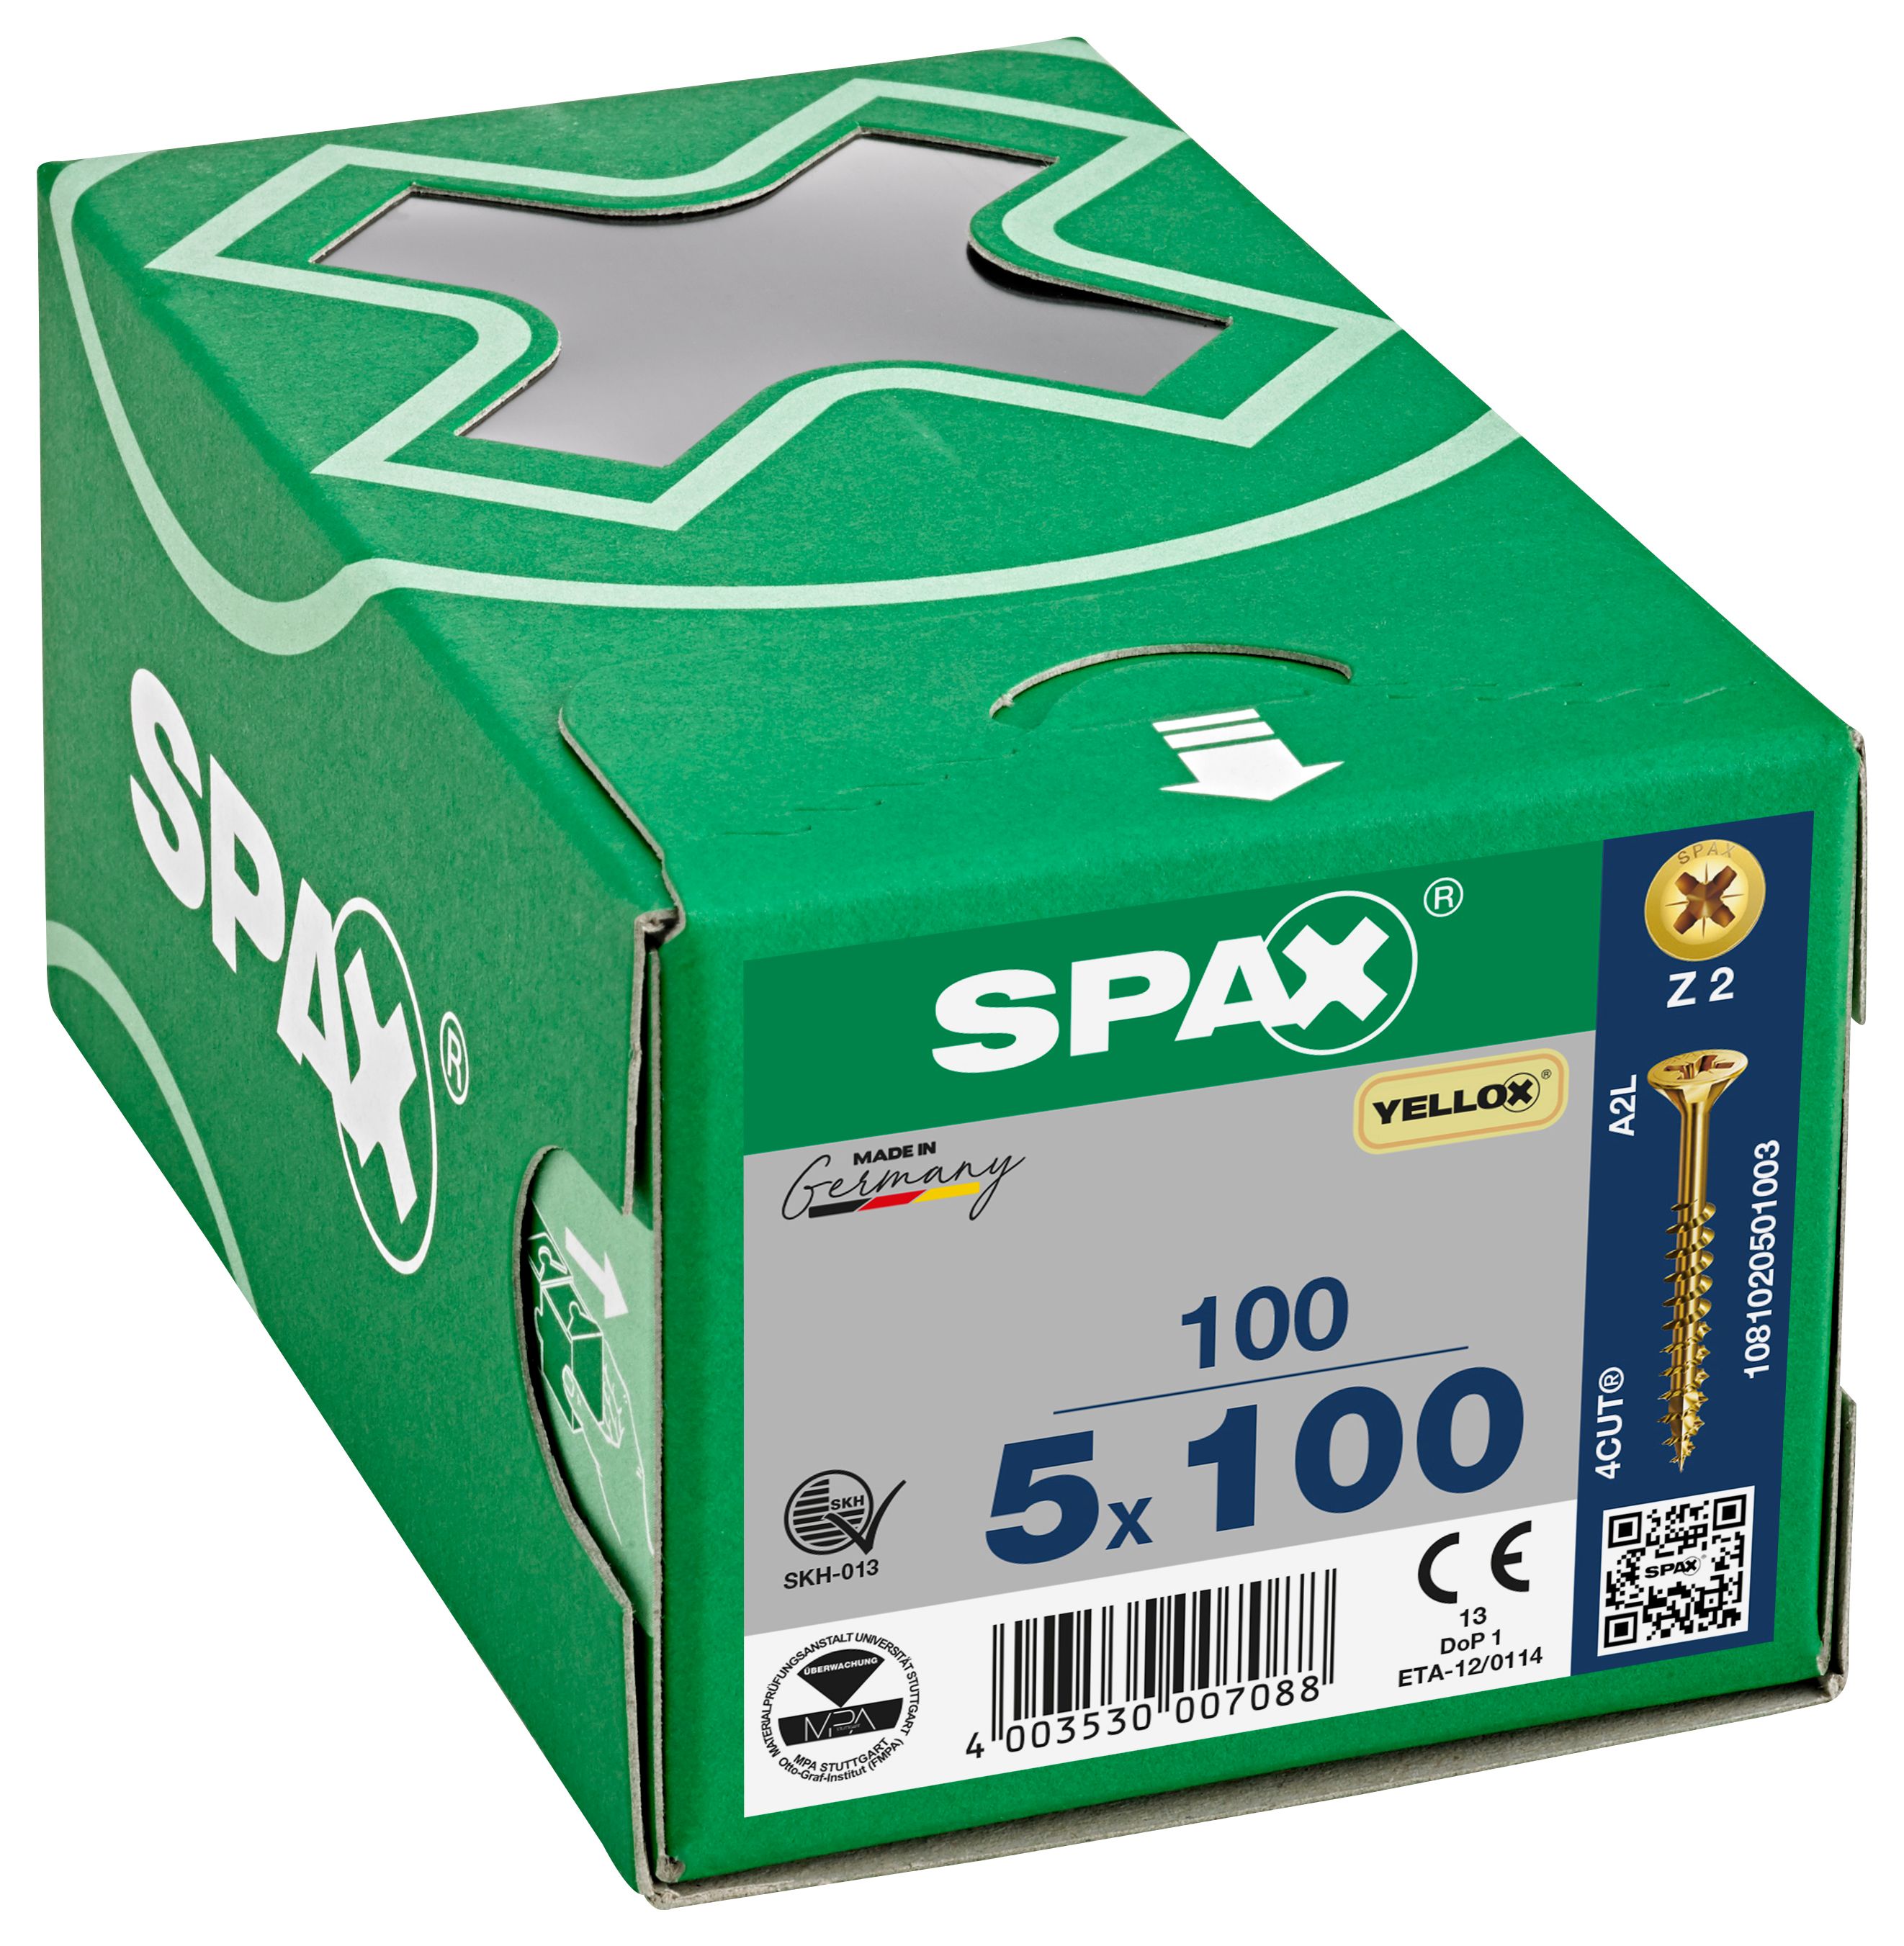 Image of Spax Pz Countersunk Yellox Screws - 5x100mm Pack Of 100